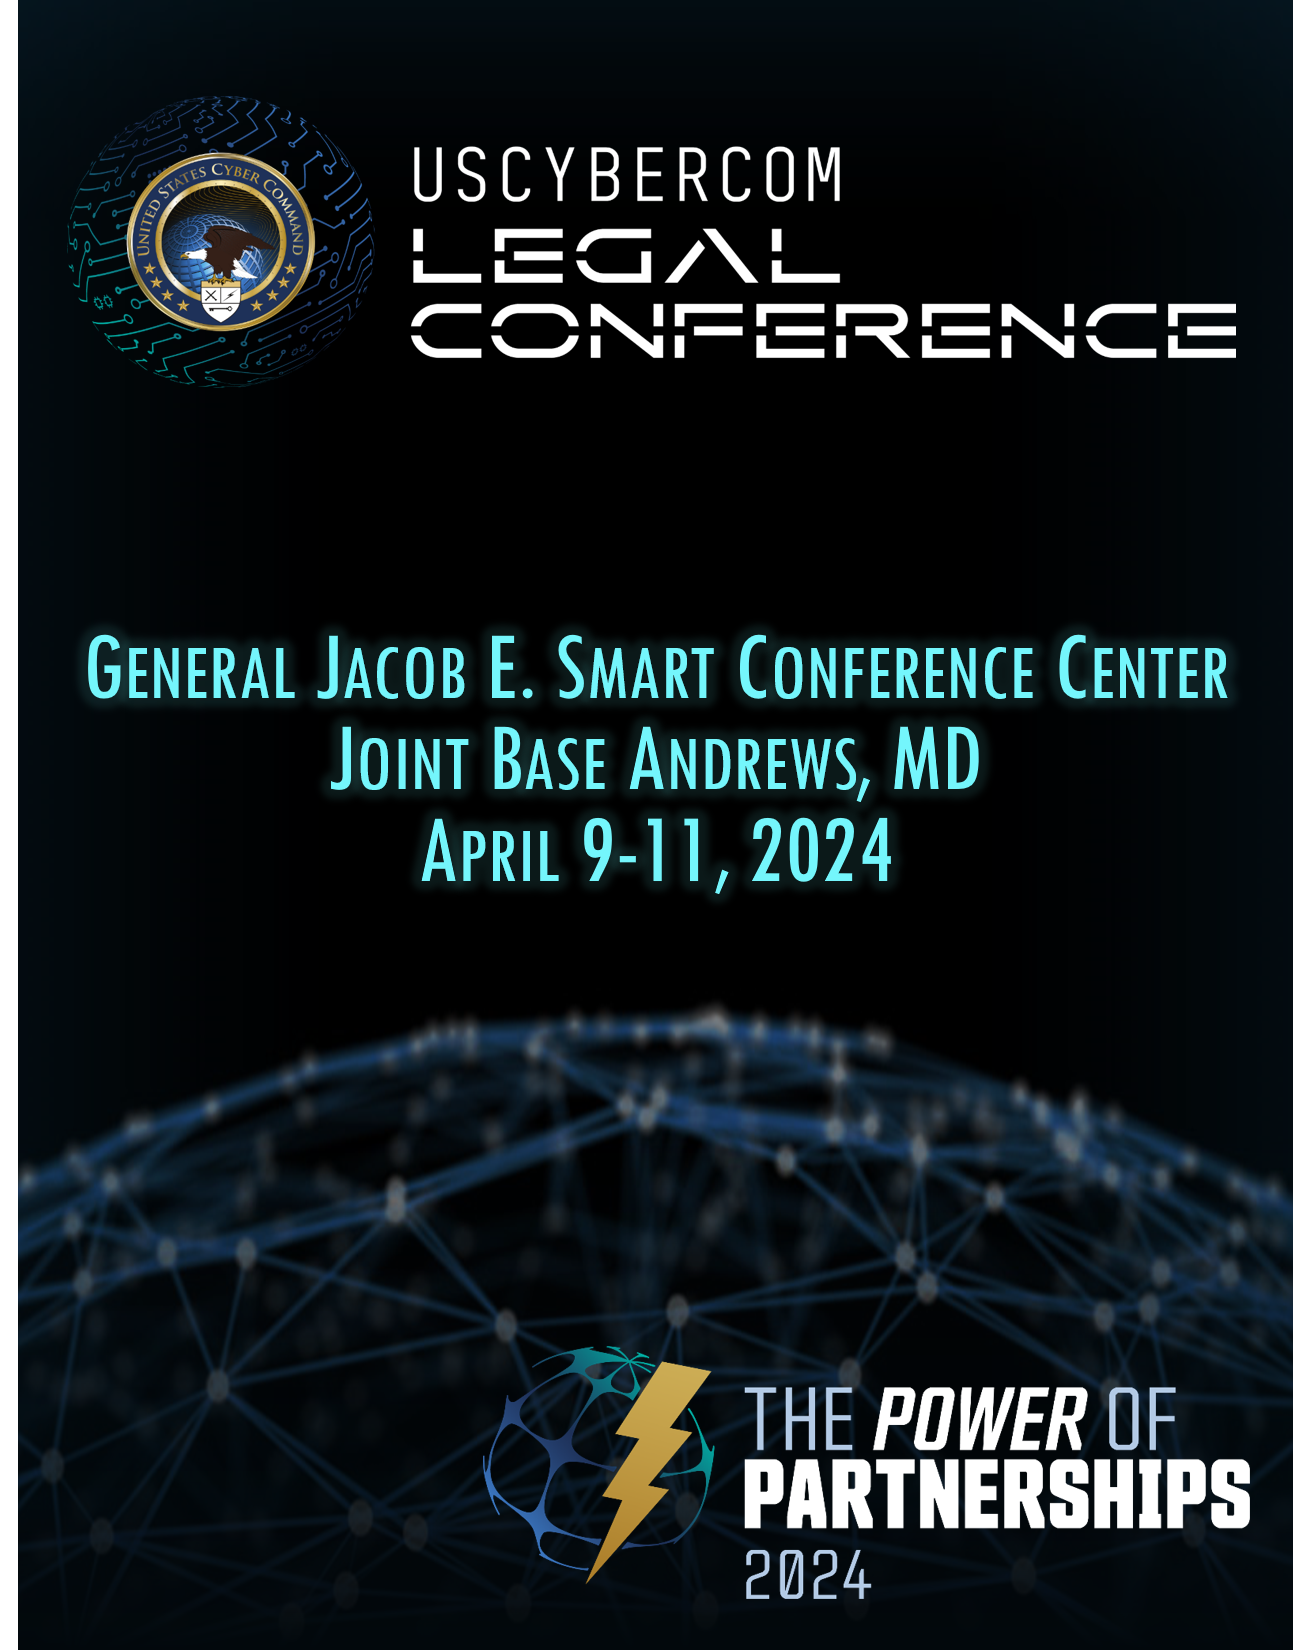 Legal Conference Graphic 